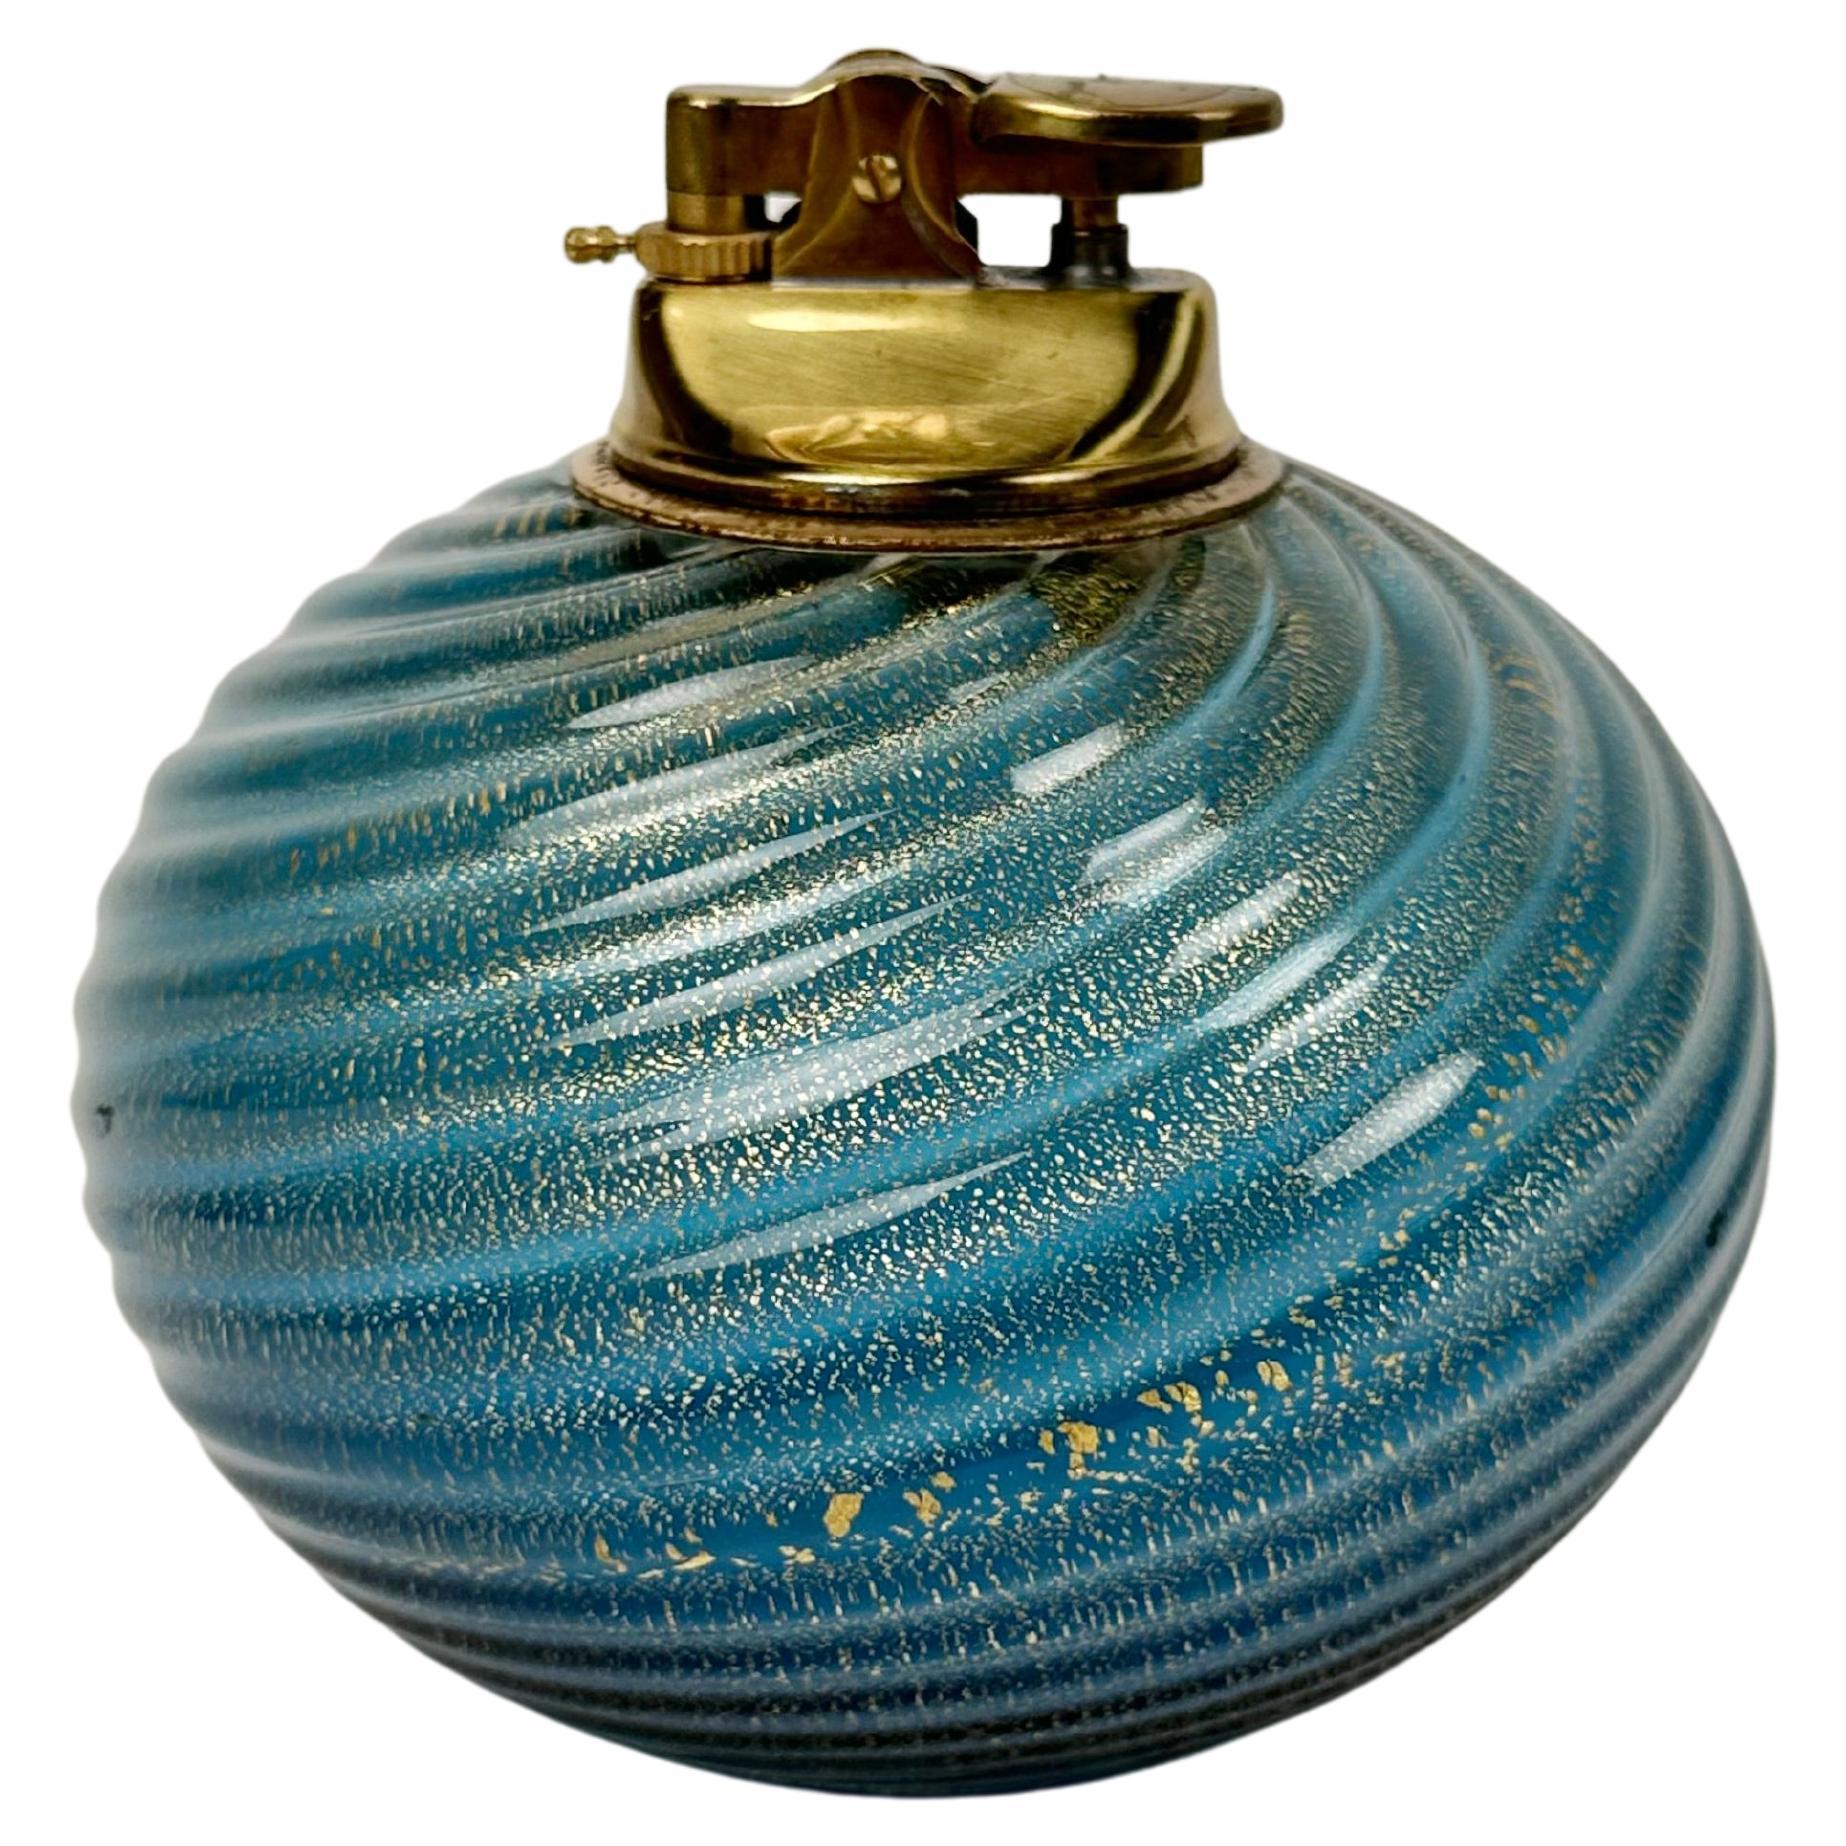 Elegant table lighter in Murano glass made by the Italian designer Tommaso Barbi.

Made in Italy in the 1970s.

The lighter is functioning and original label is still attached on the back, as shown in the pictures.

Perfect desk object or gift